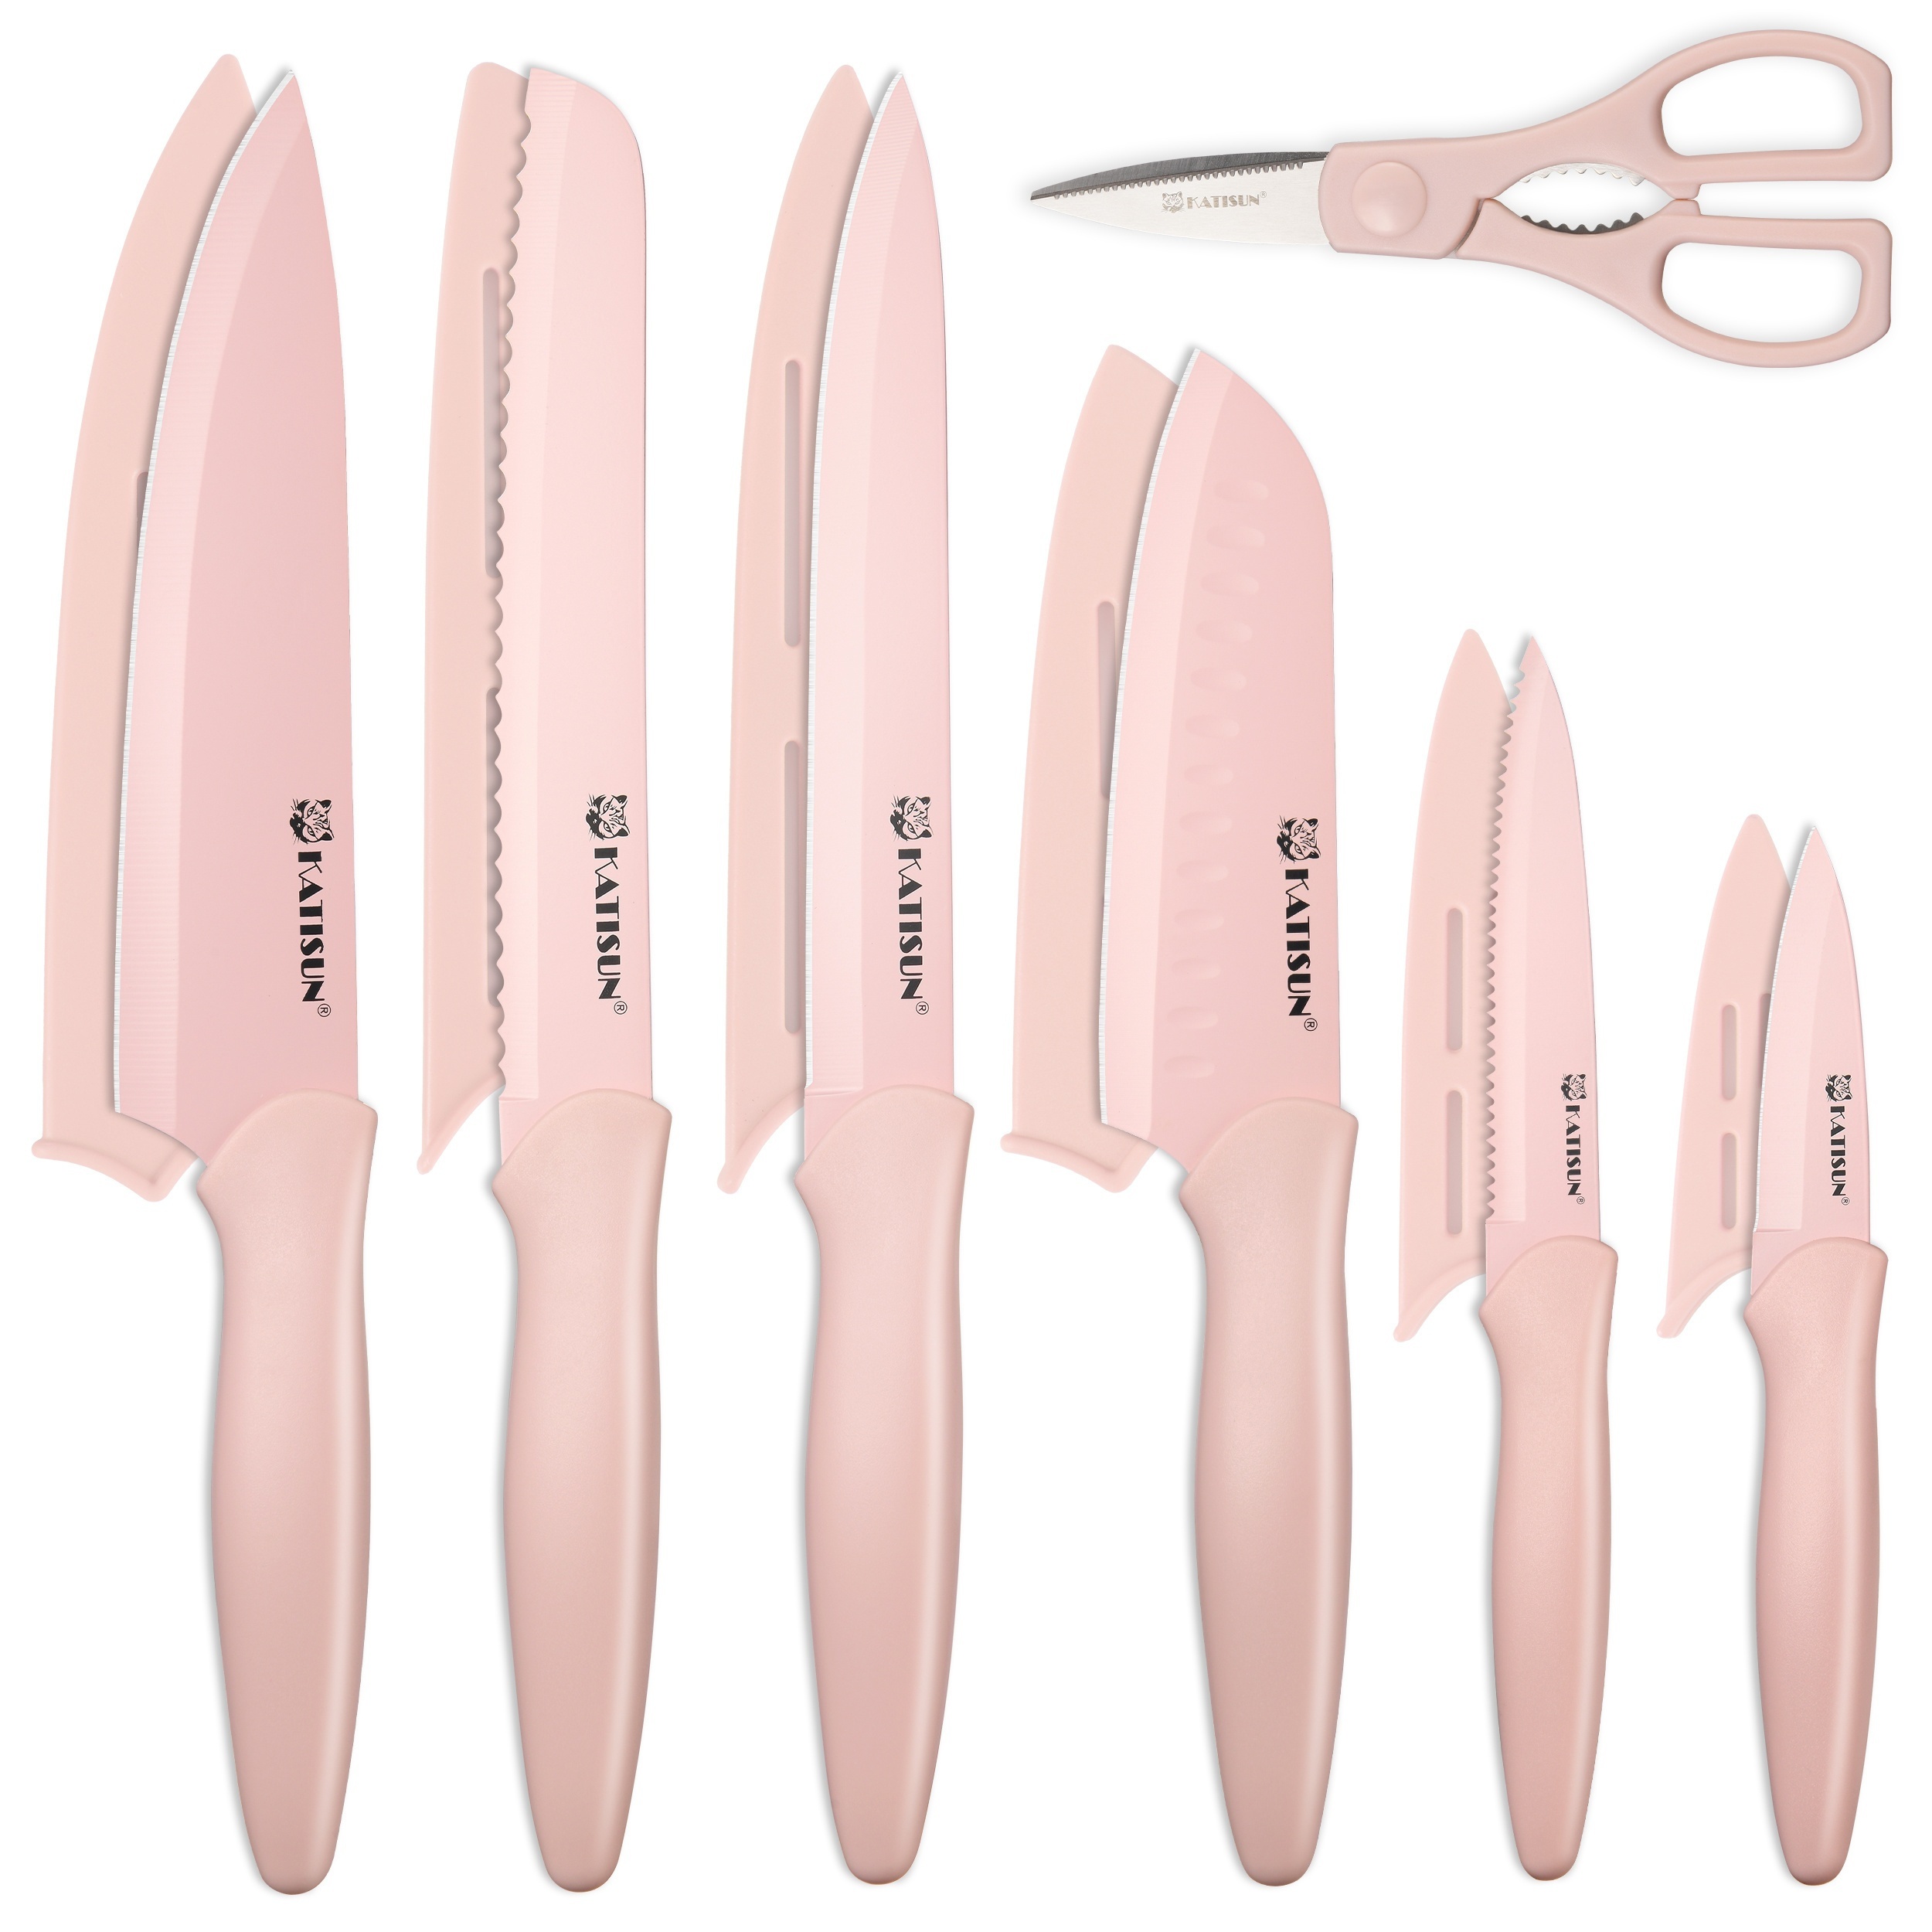 

13 Piece Non-stick Coating Stainless Steel Boxed Knives Set, Anti-rust And Dishwasher Safe, 6 Knives With 6 Blade Covers And 1 Kitchen Shear